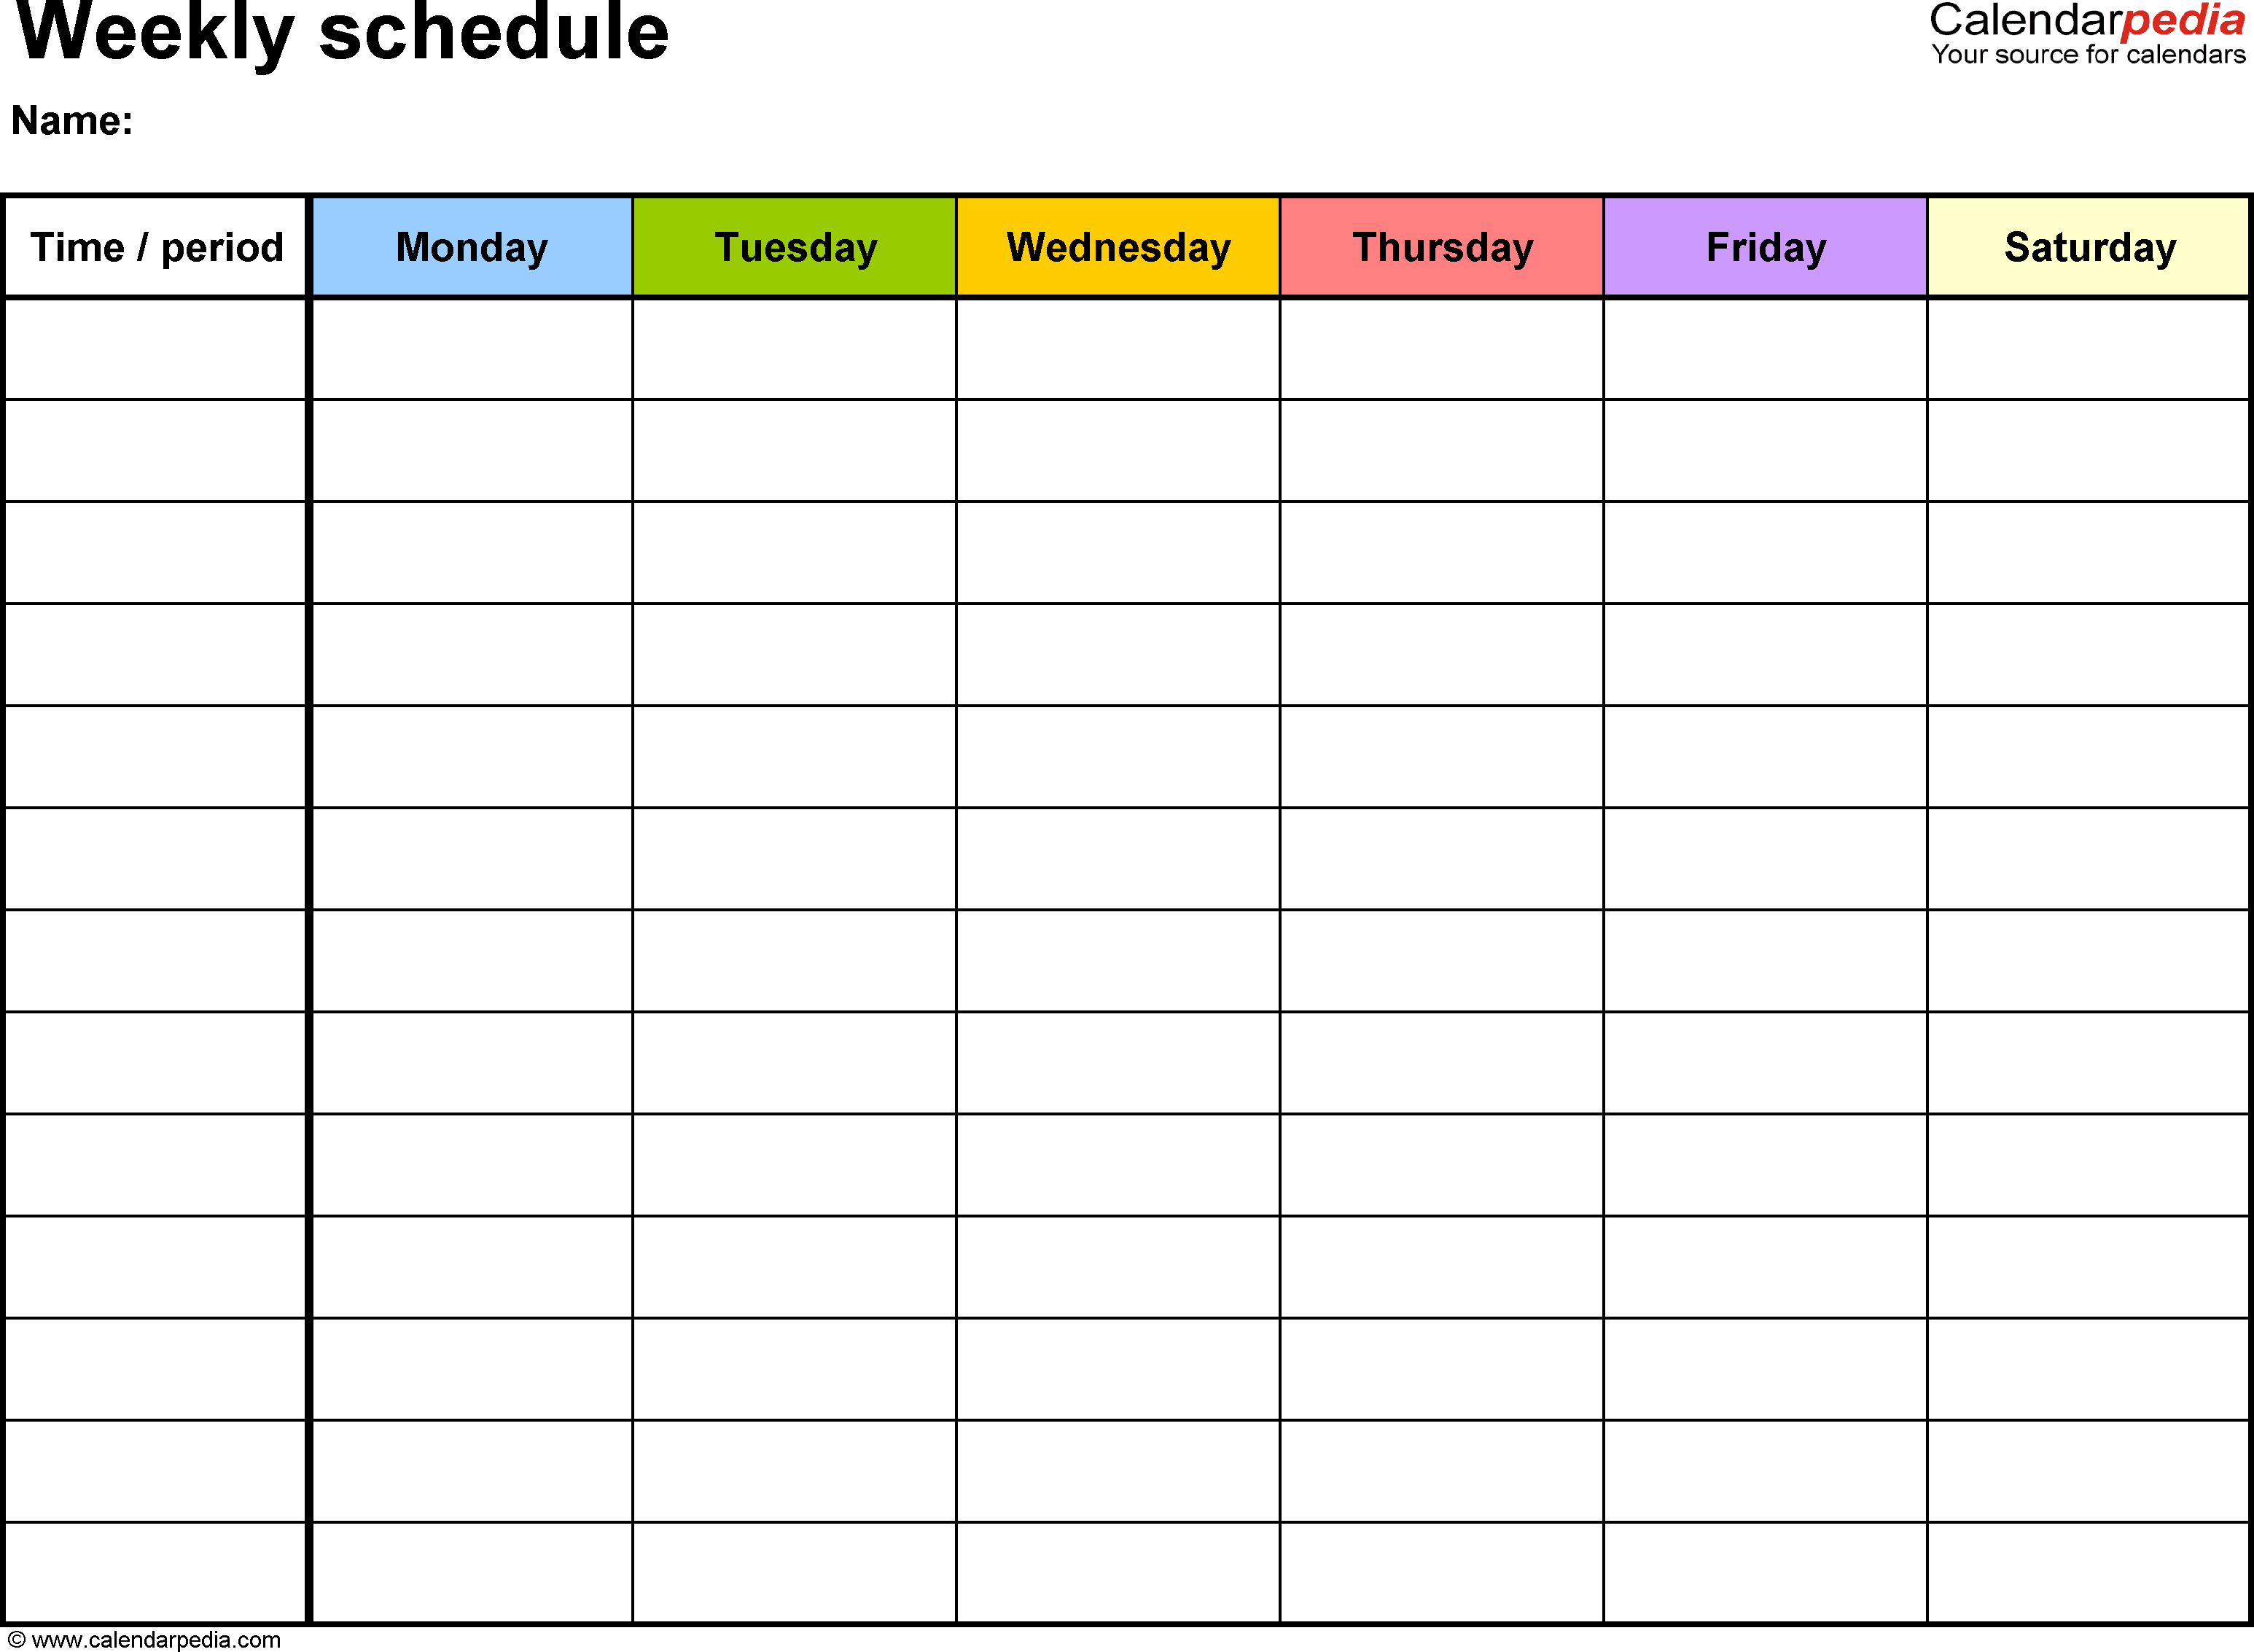 Free Weekly Schedule Templates For Word - 18 Templates - Free Printable Work Schedule Maker